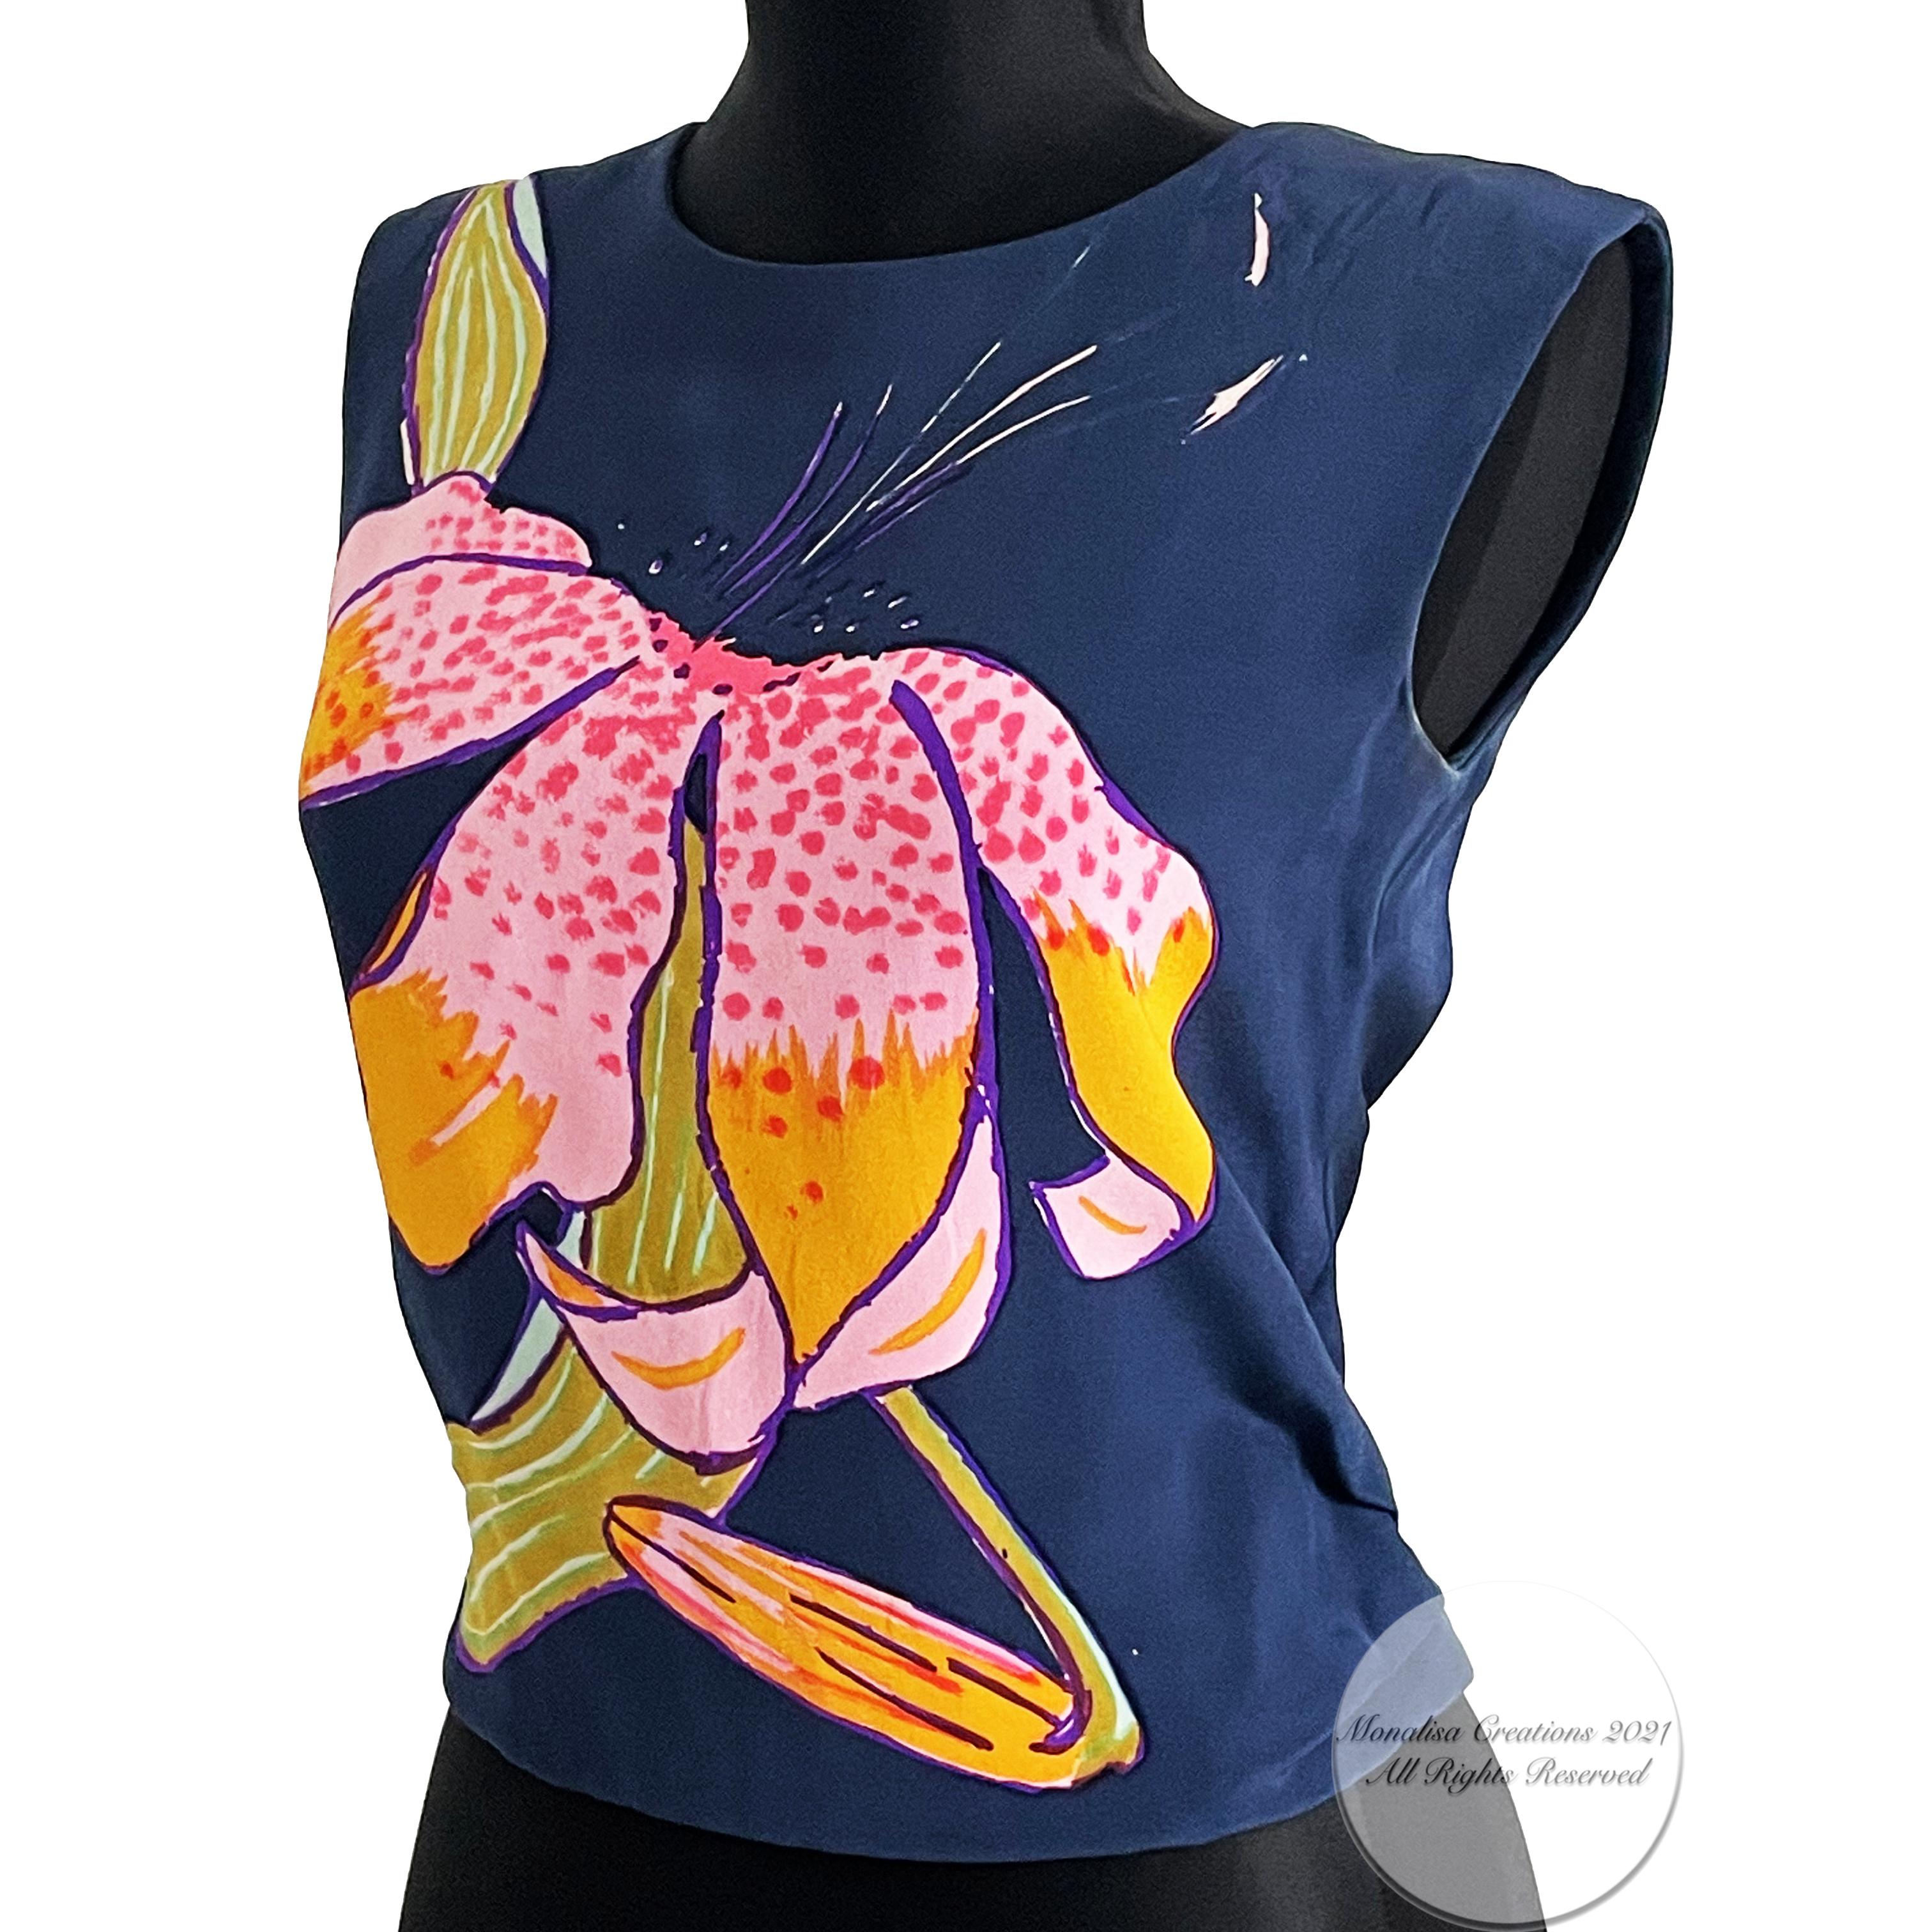 Women's Christian Lacroix Blouse Silk Hand Painted Haute Couture Numbered Vintage 90s S